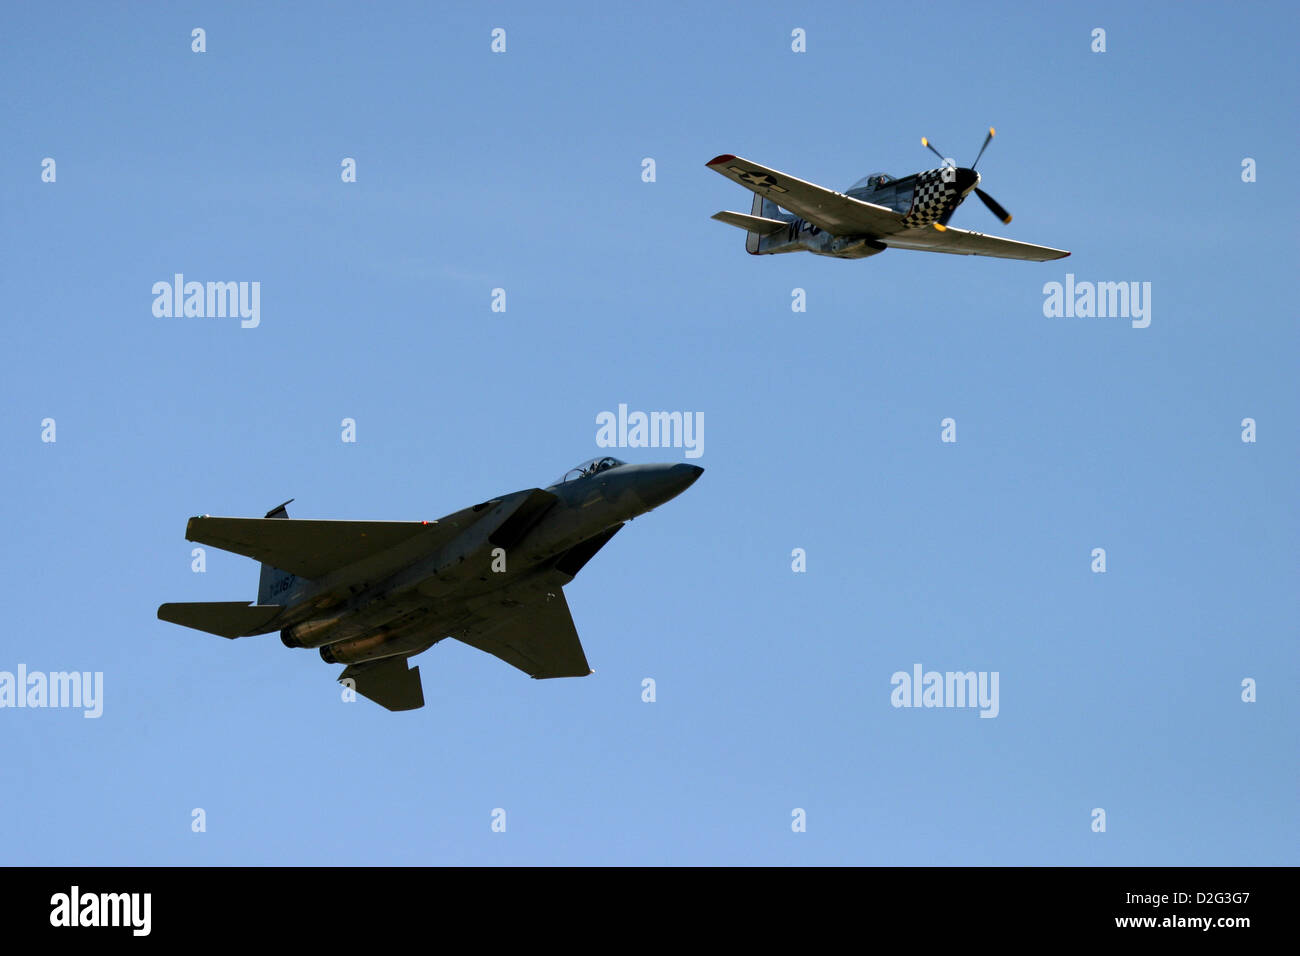 P51D Mustang  Grumman F14 Tomcat fly together at RAF Tattoo Fairford UK  Stock Photo  Alamy